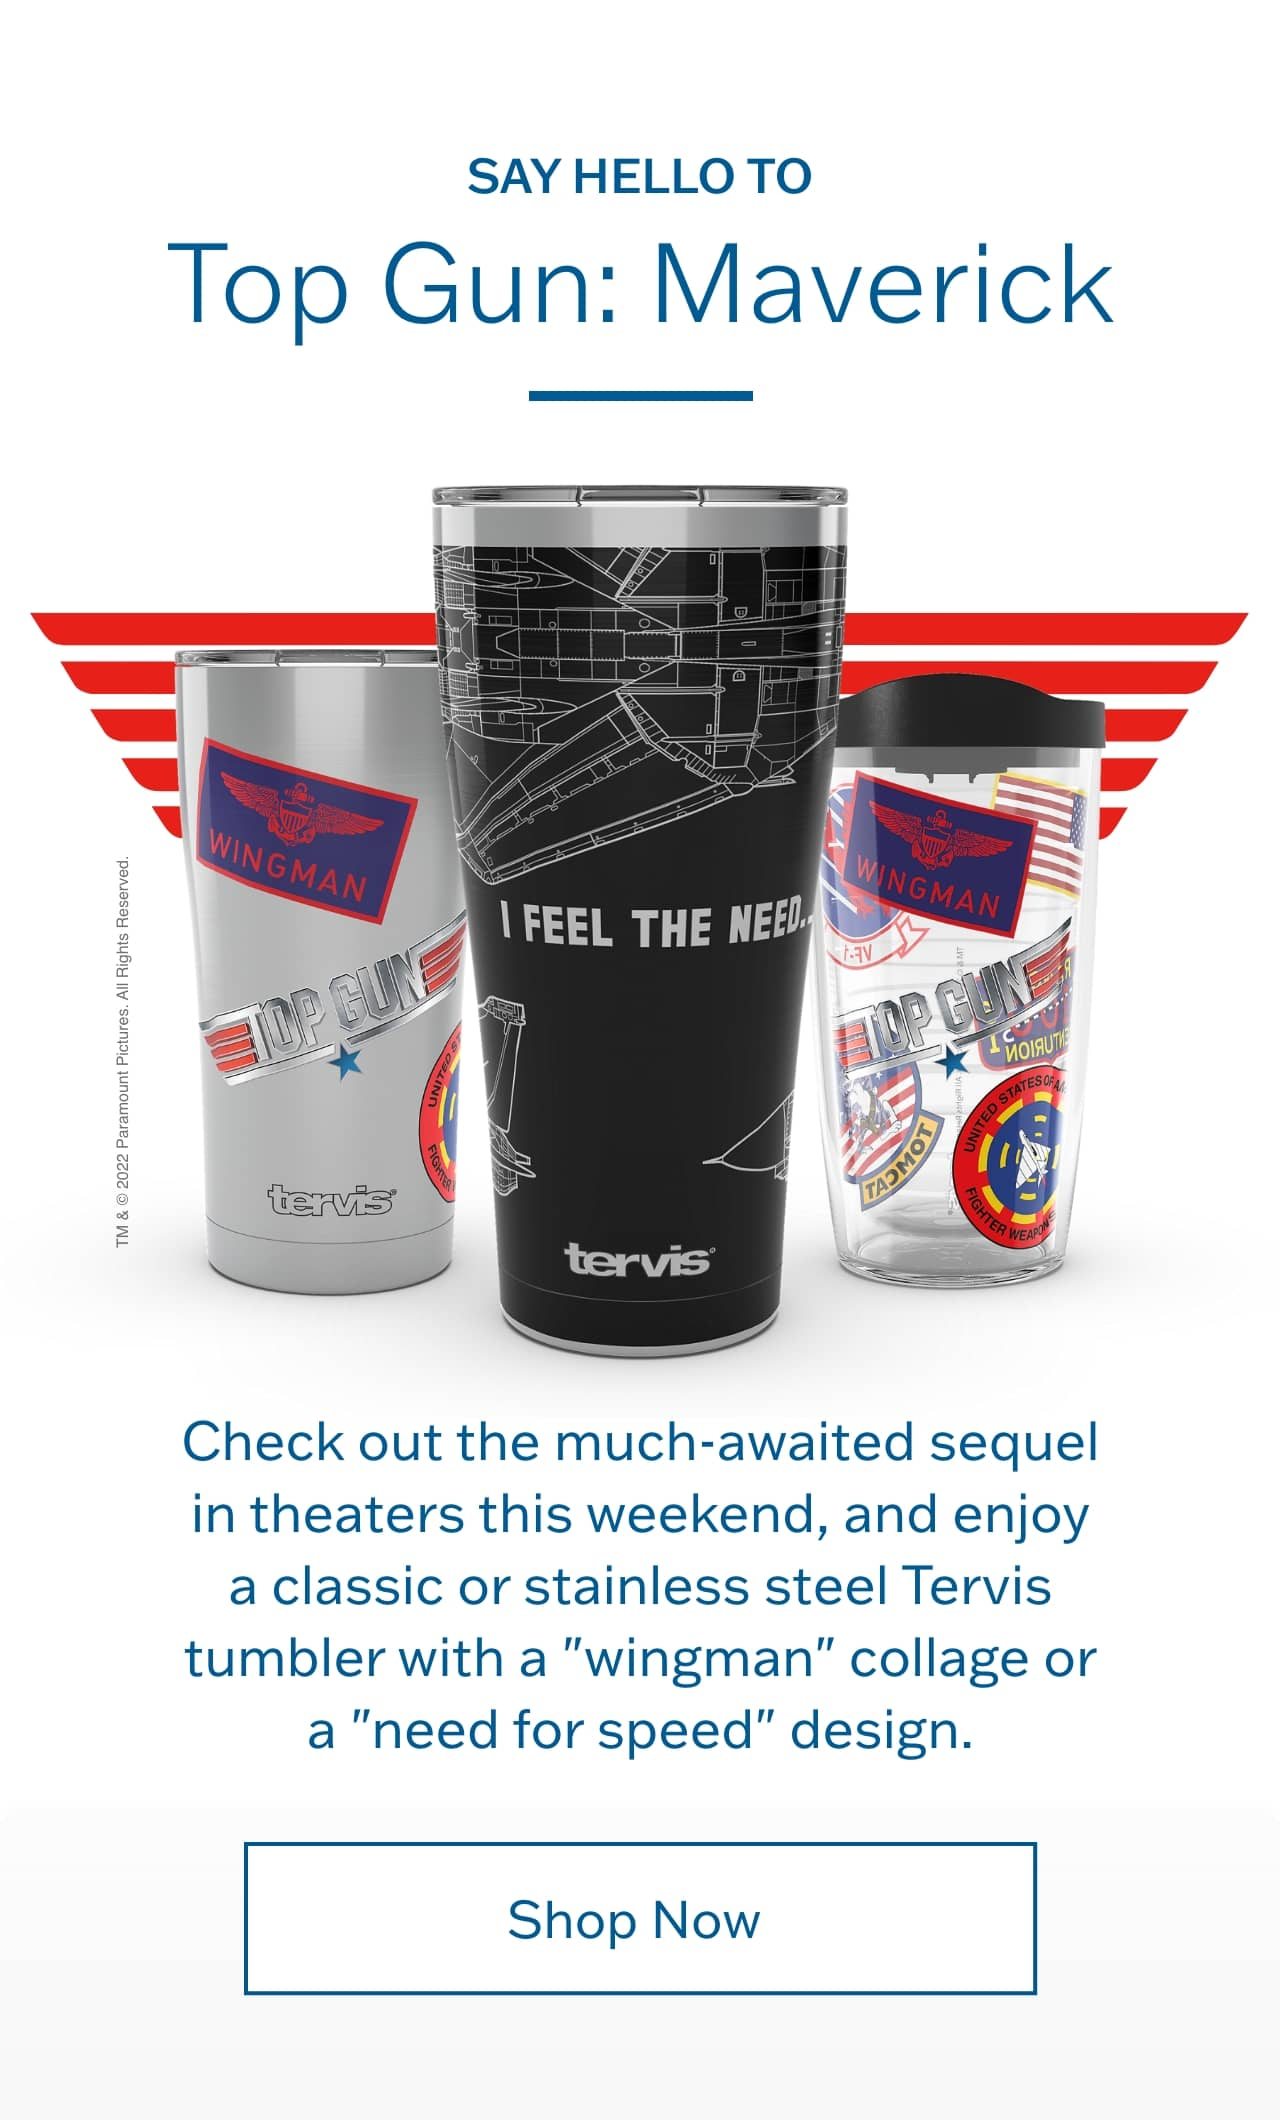 Say hello to Top Gun: Maverick - Check out the much-awaited sequel in theaters this weekend, and enjoy a classic or stainless steel Tervis tumbler with a "wingman" collage or a "need for speed" design.